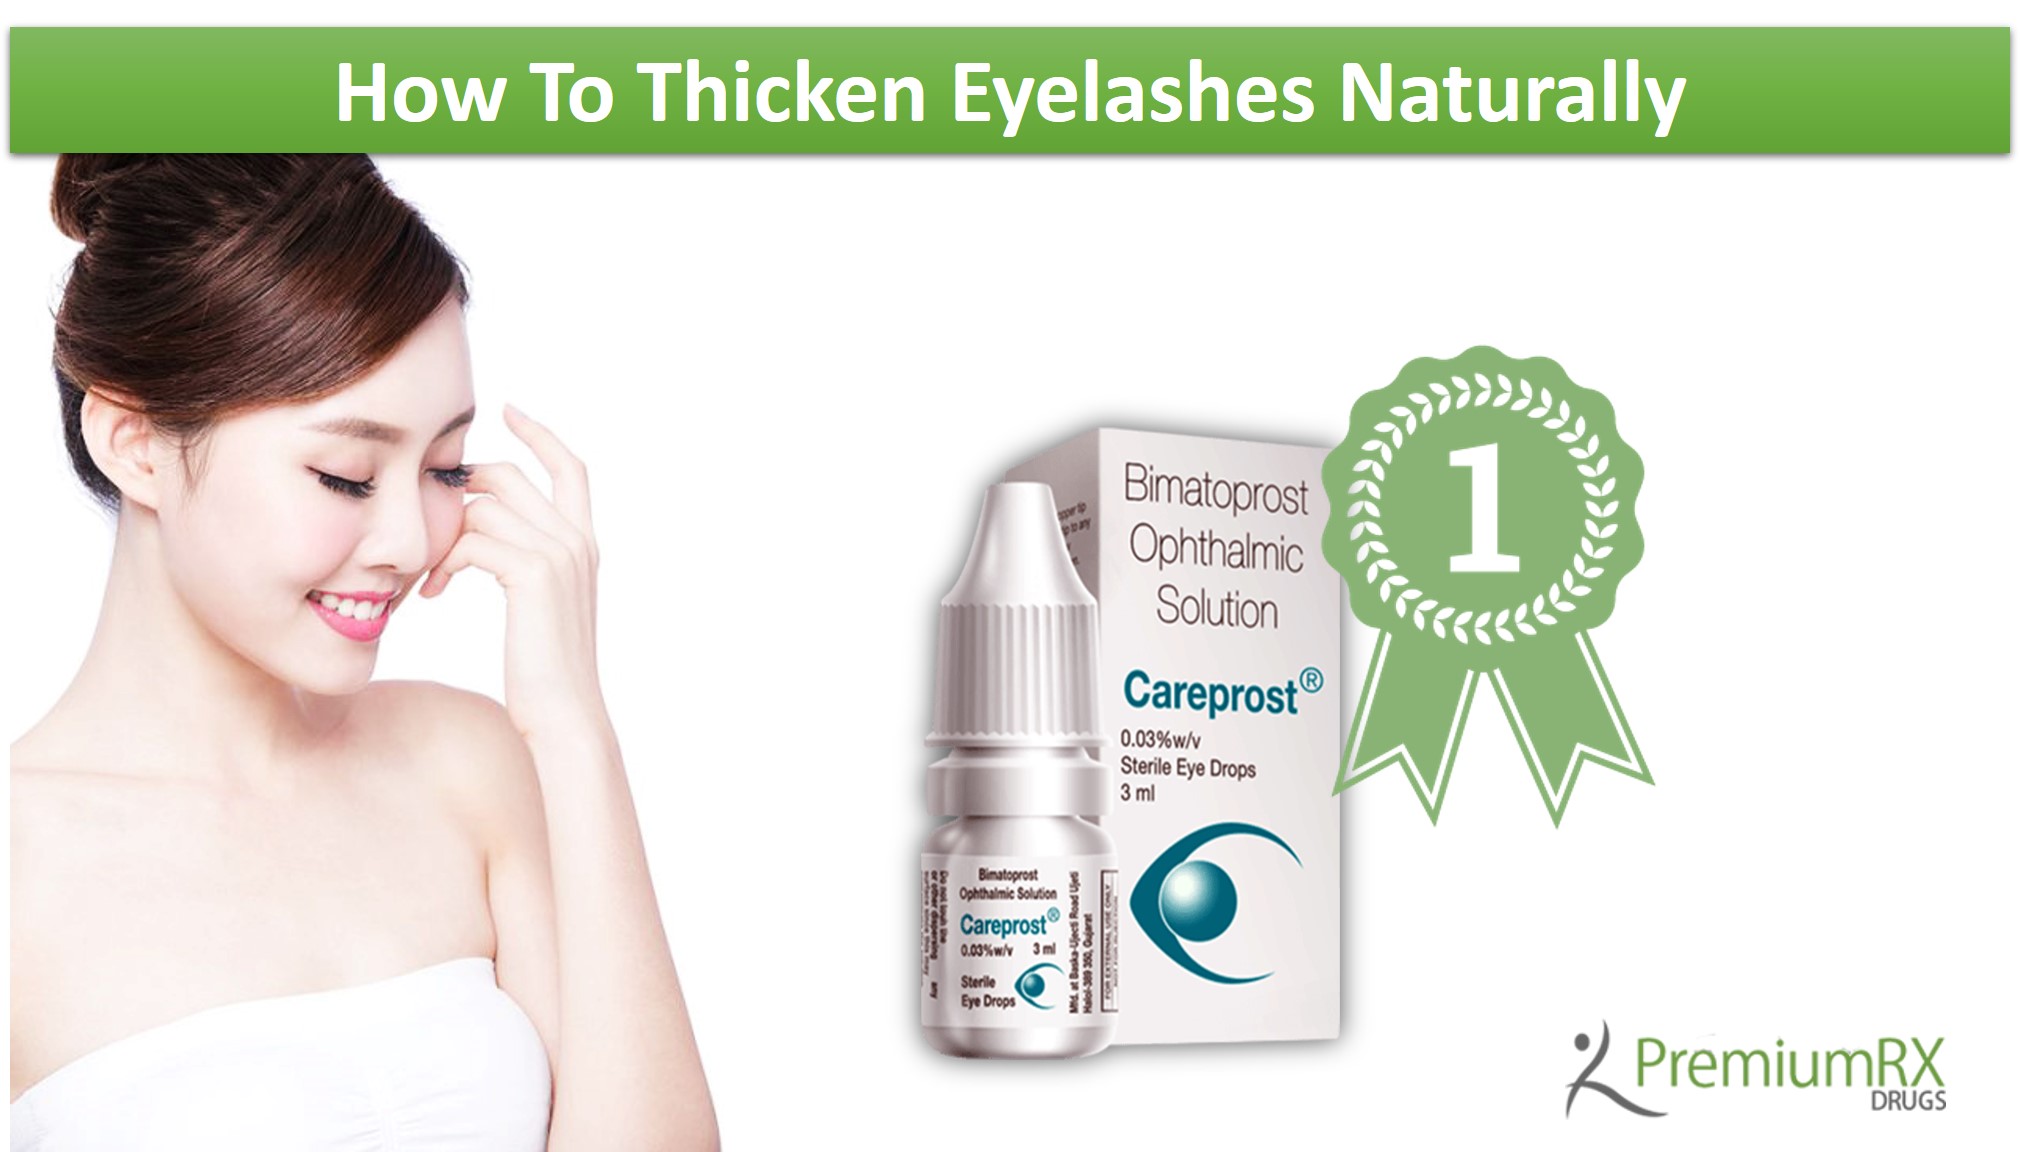 How To Thicken Eyelashes Naturally